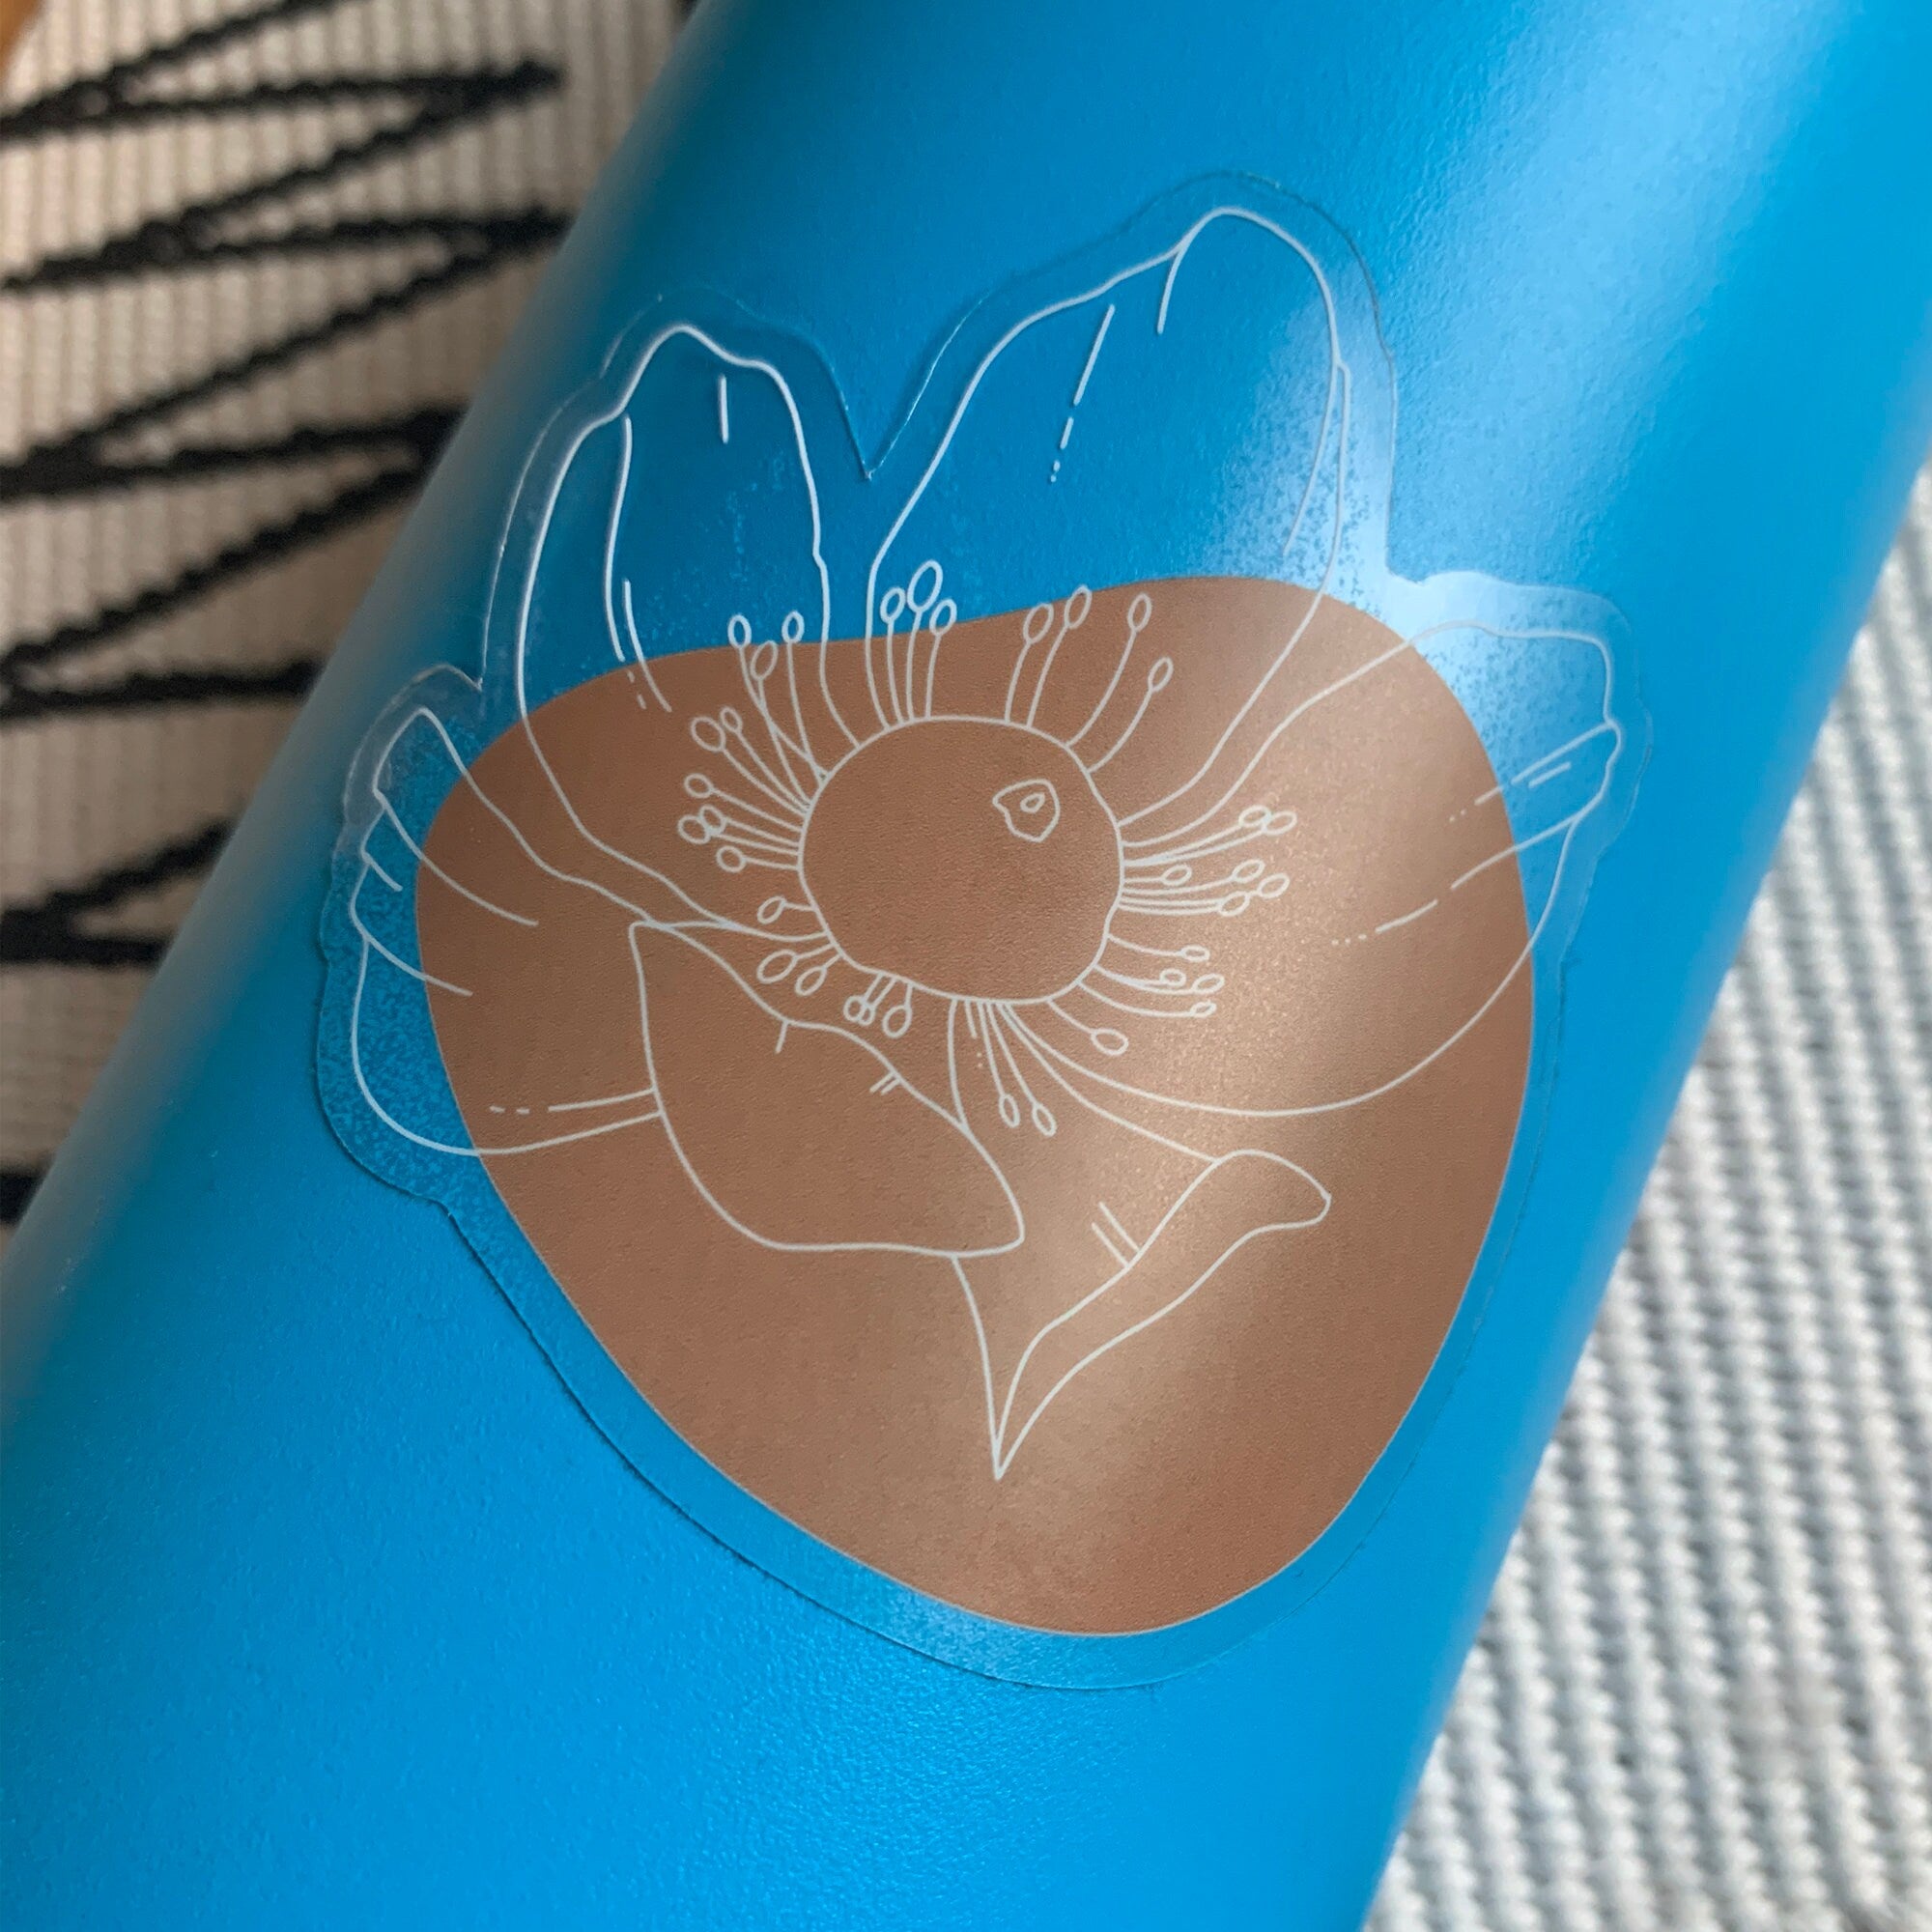 Rust/Terracotta Anemone Flower 3" Clear Background Vinyl Sticker for Water Bottles, Laptops, Phone Cases, & More **FREE USA SHIPPING**